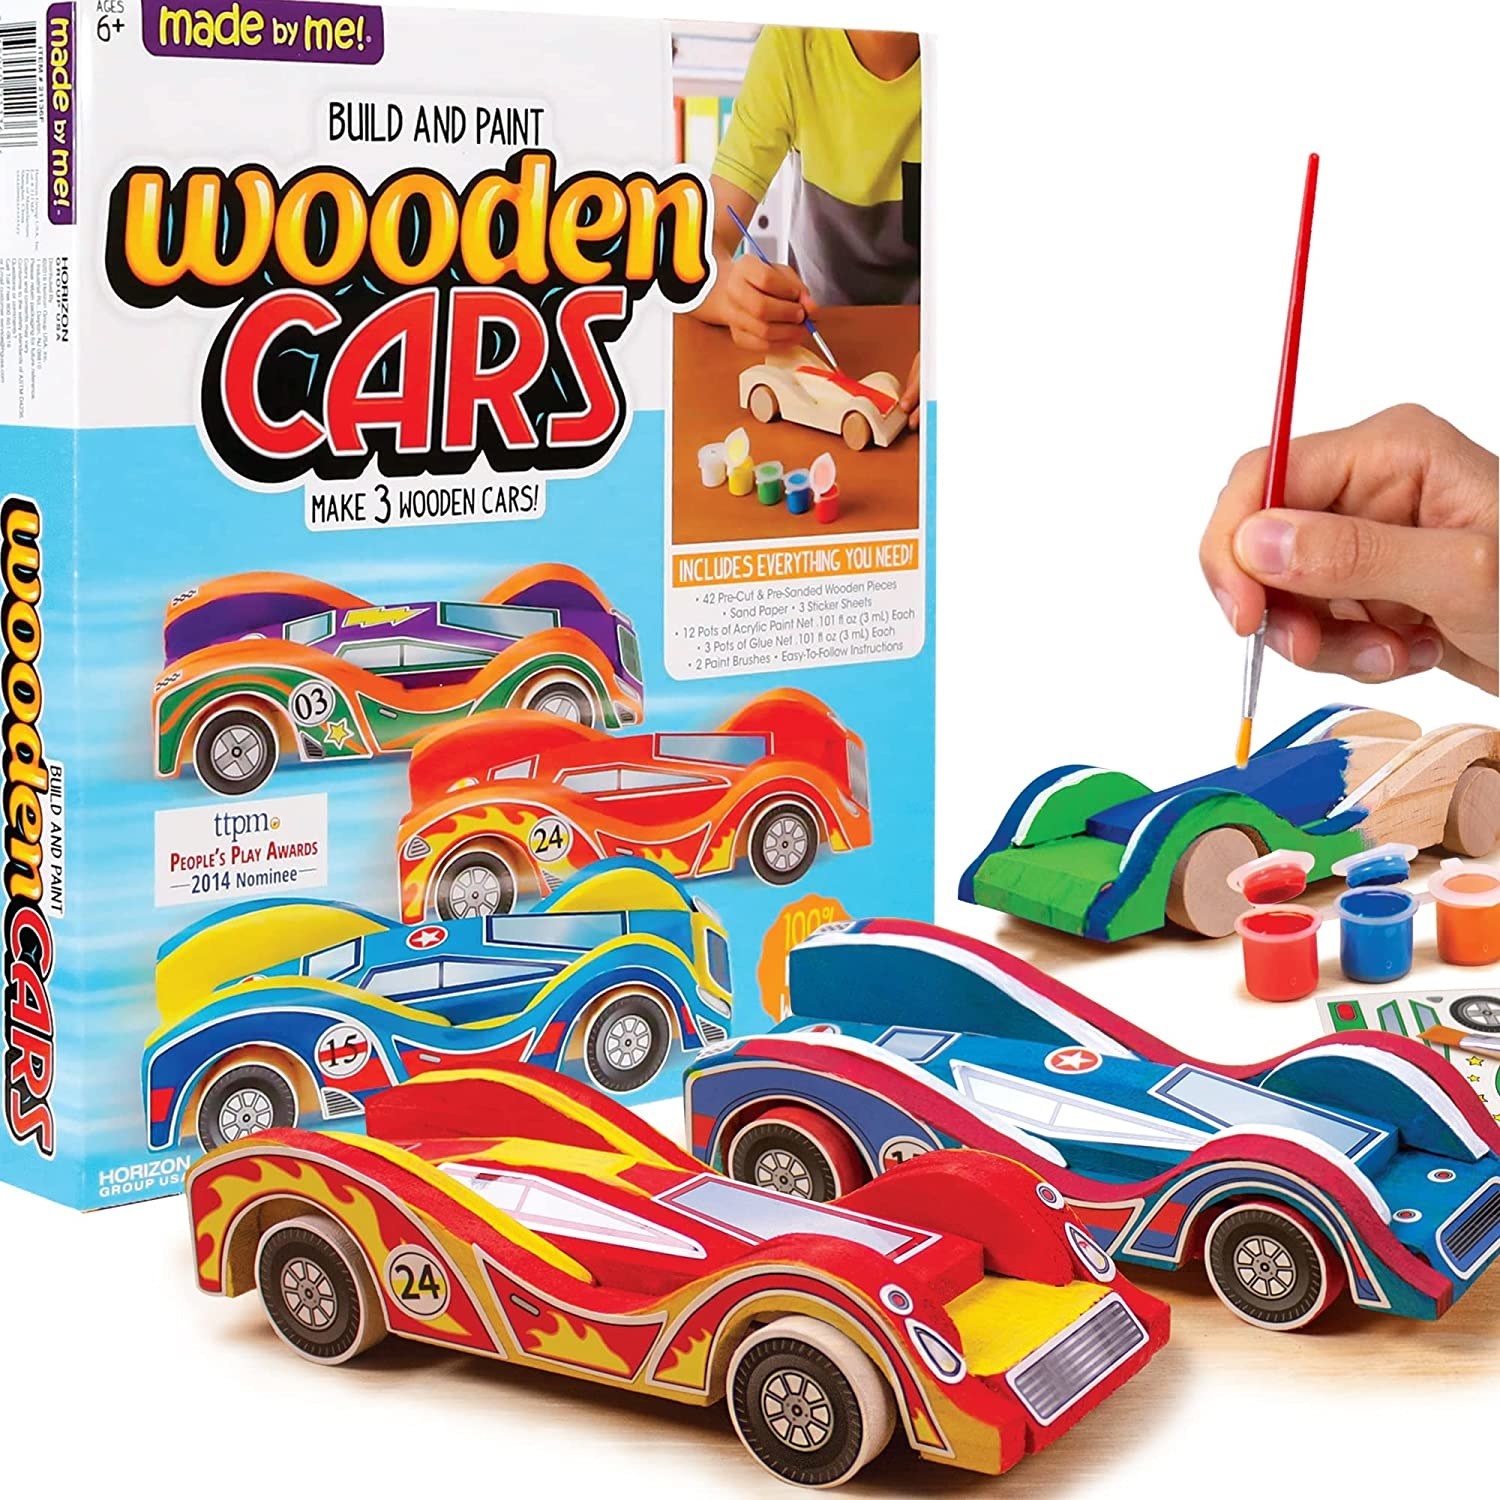 Packaging and three colorful painted wooden toy cars